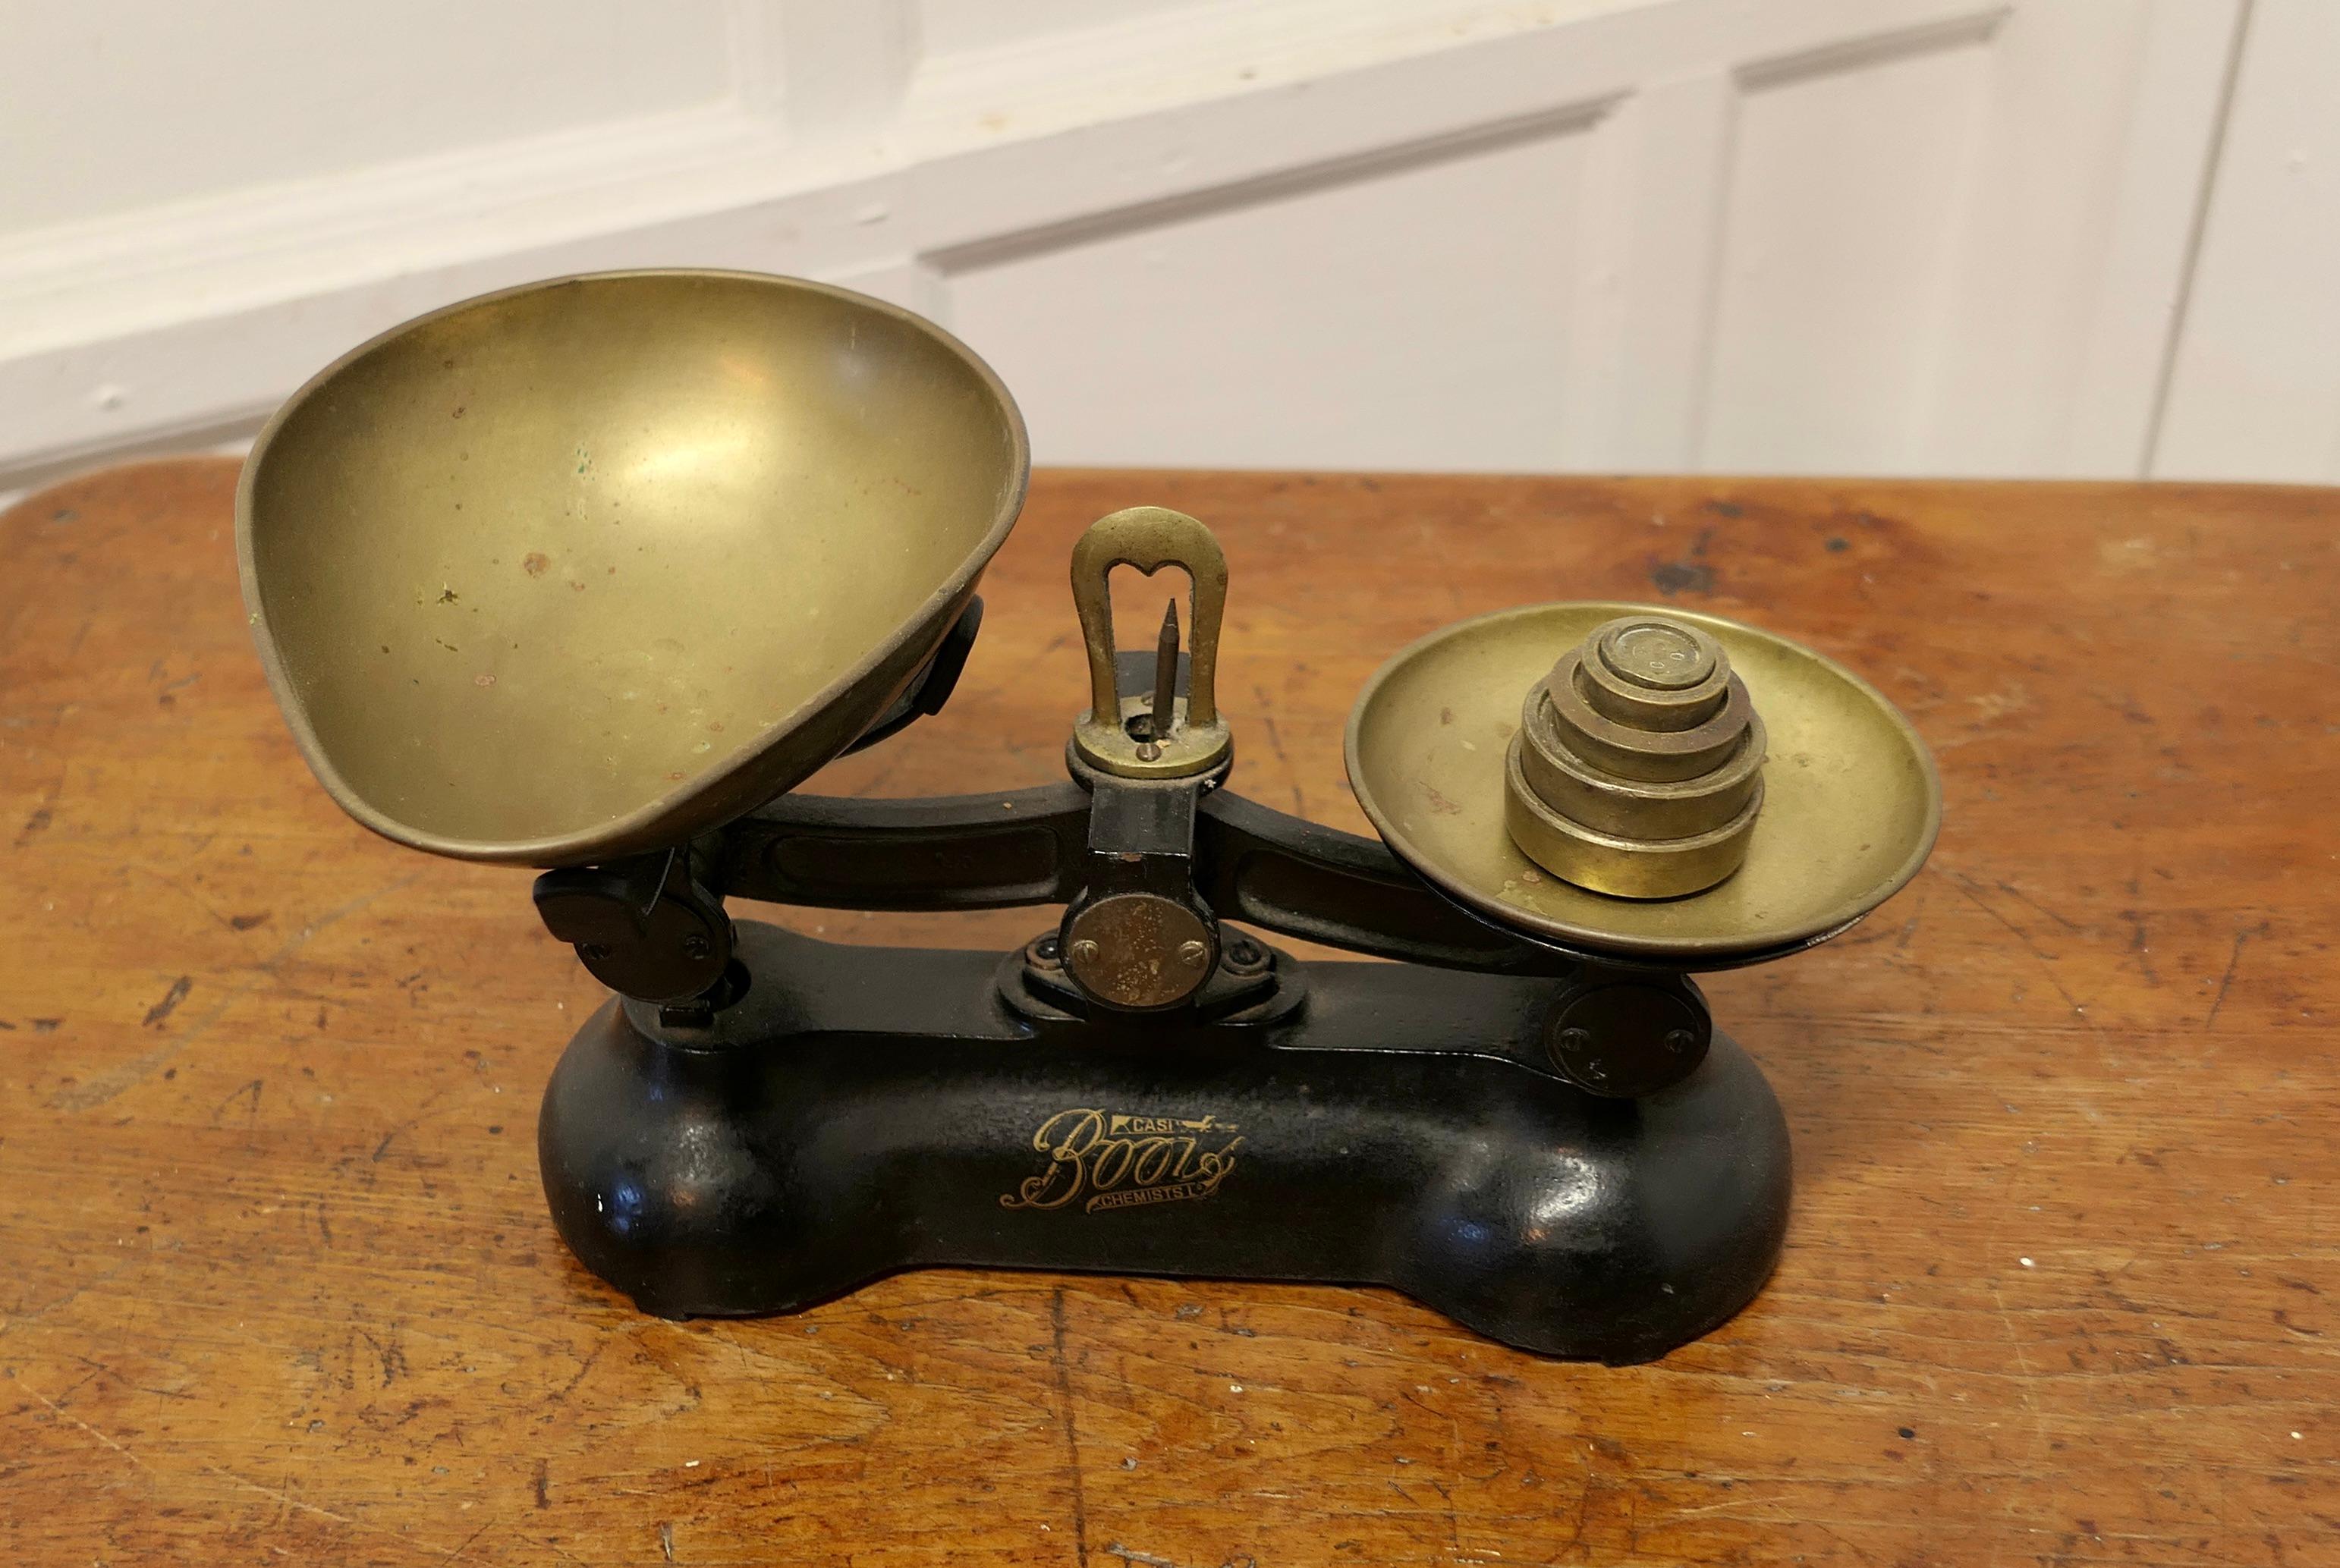 boots weighing scales